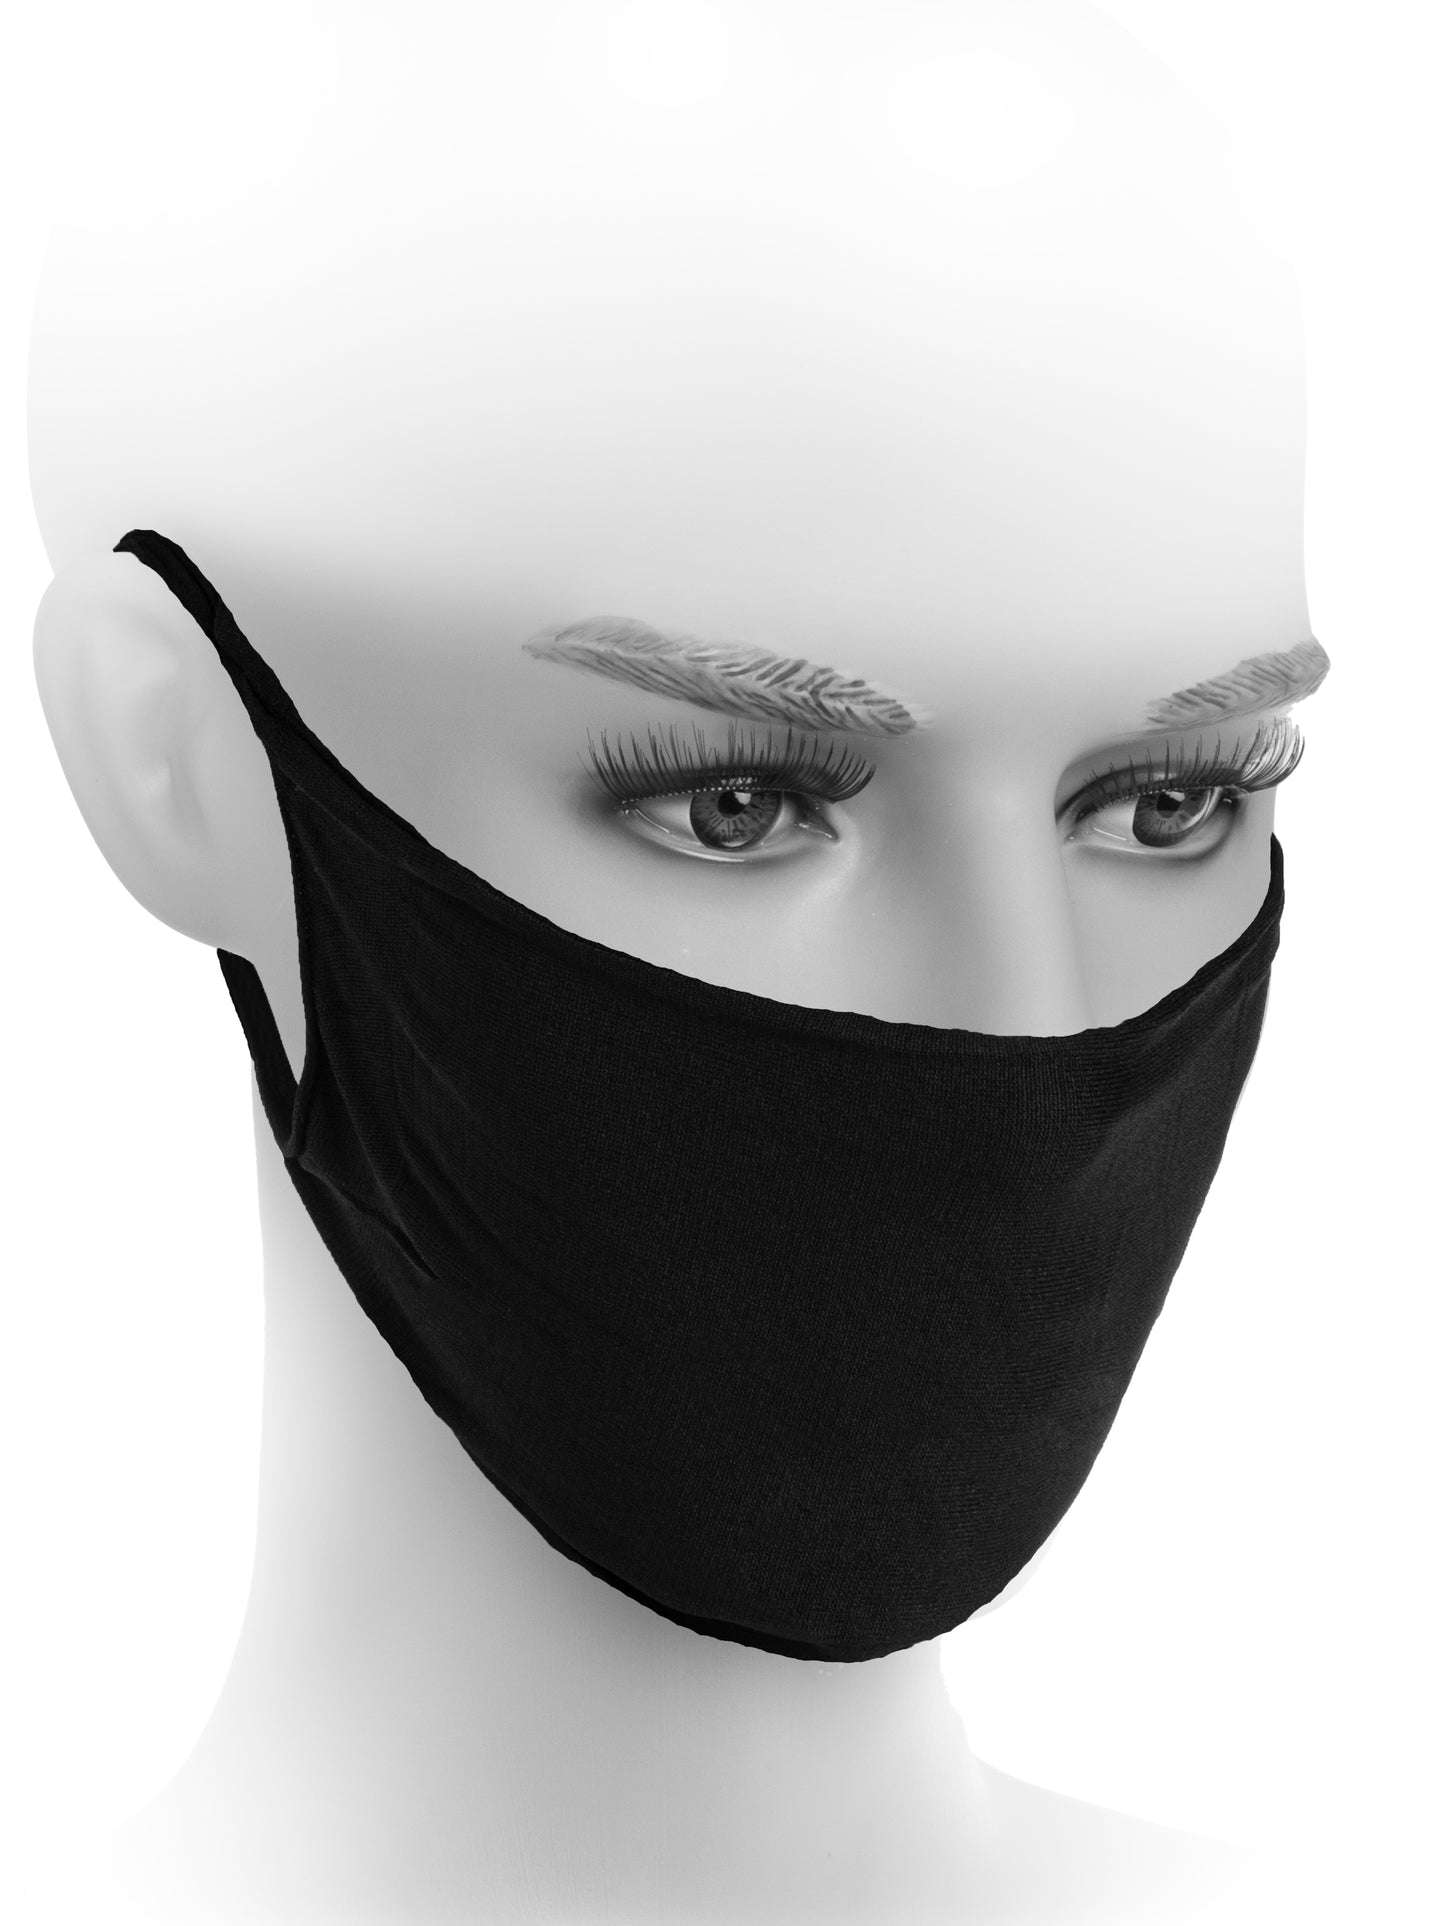 Fiore Hygiene Face Mask M0001 - face covering in black